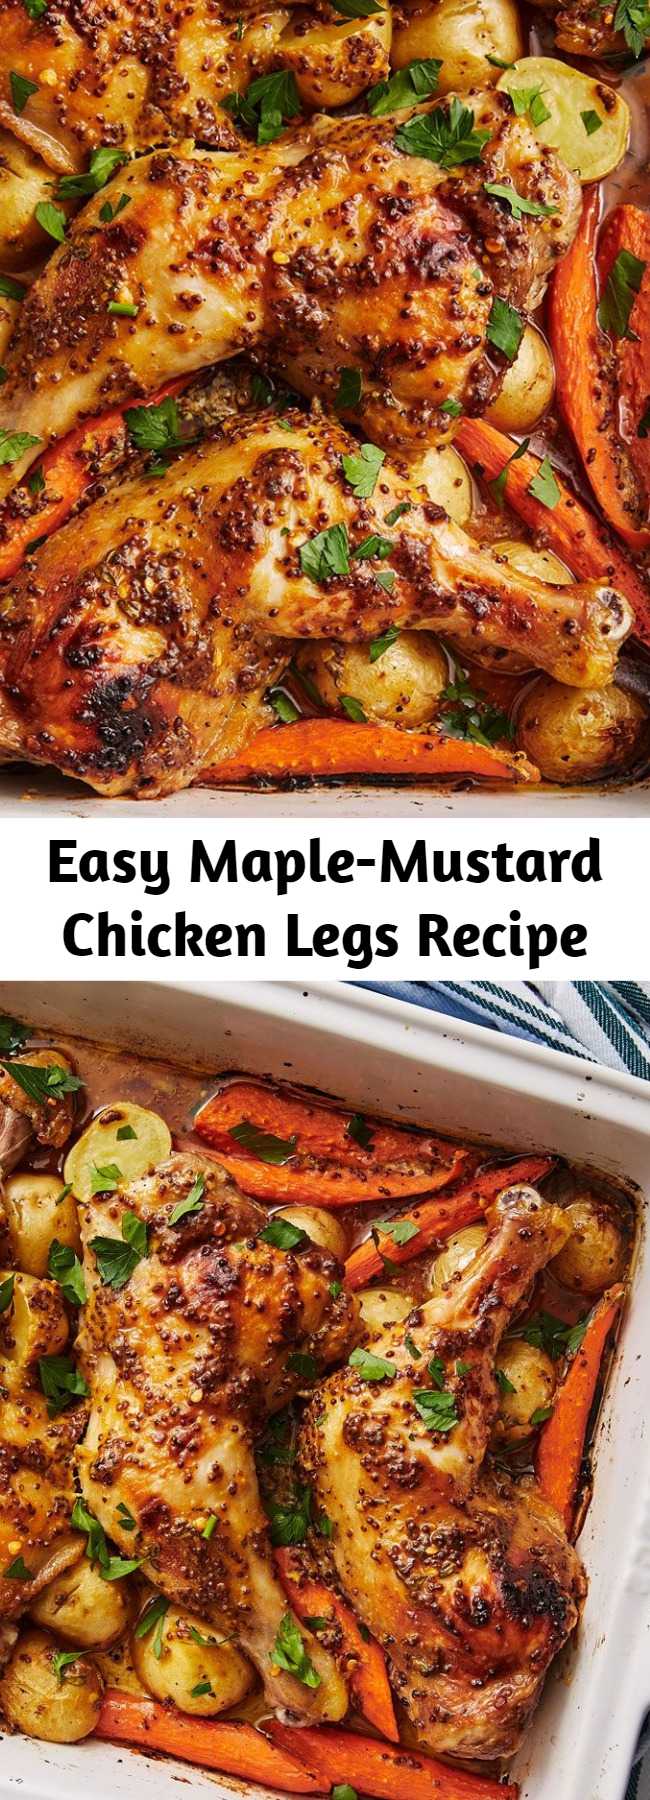 Easy Maple-Mustard Chicken Legs Recipe - Baked chicken leg quarters brushed with plenty of a maple mustard glaze make the perfect weeknight dinner.